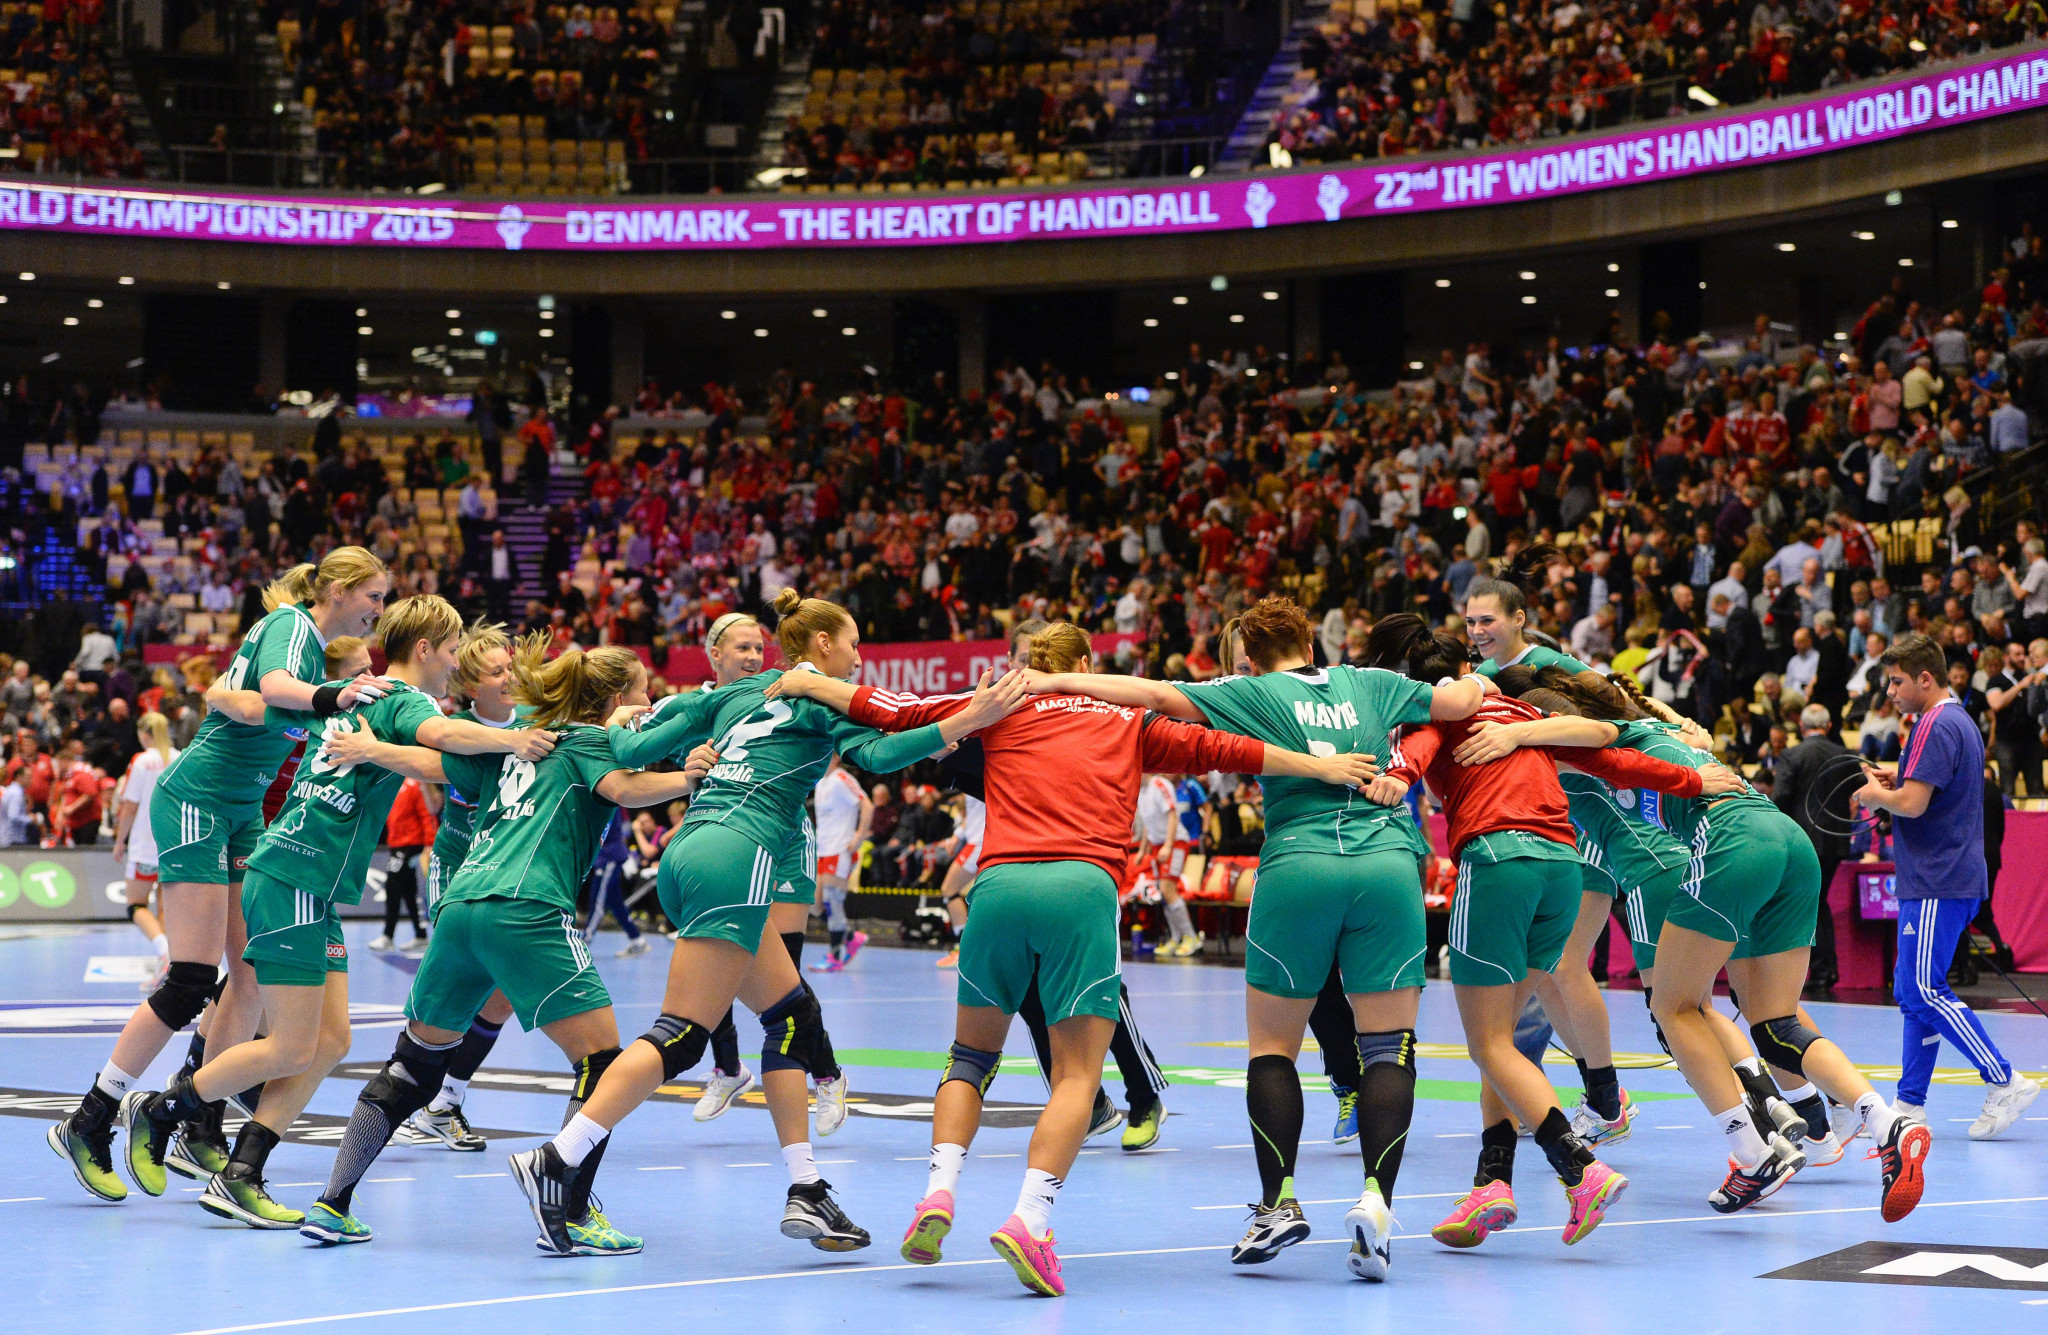 Jyske Bank Boxen in Herning will host matches at the European Women's Handball Championship ©Getty Images